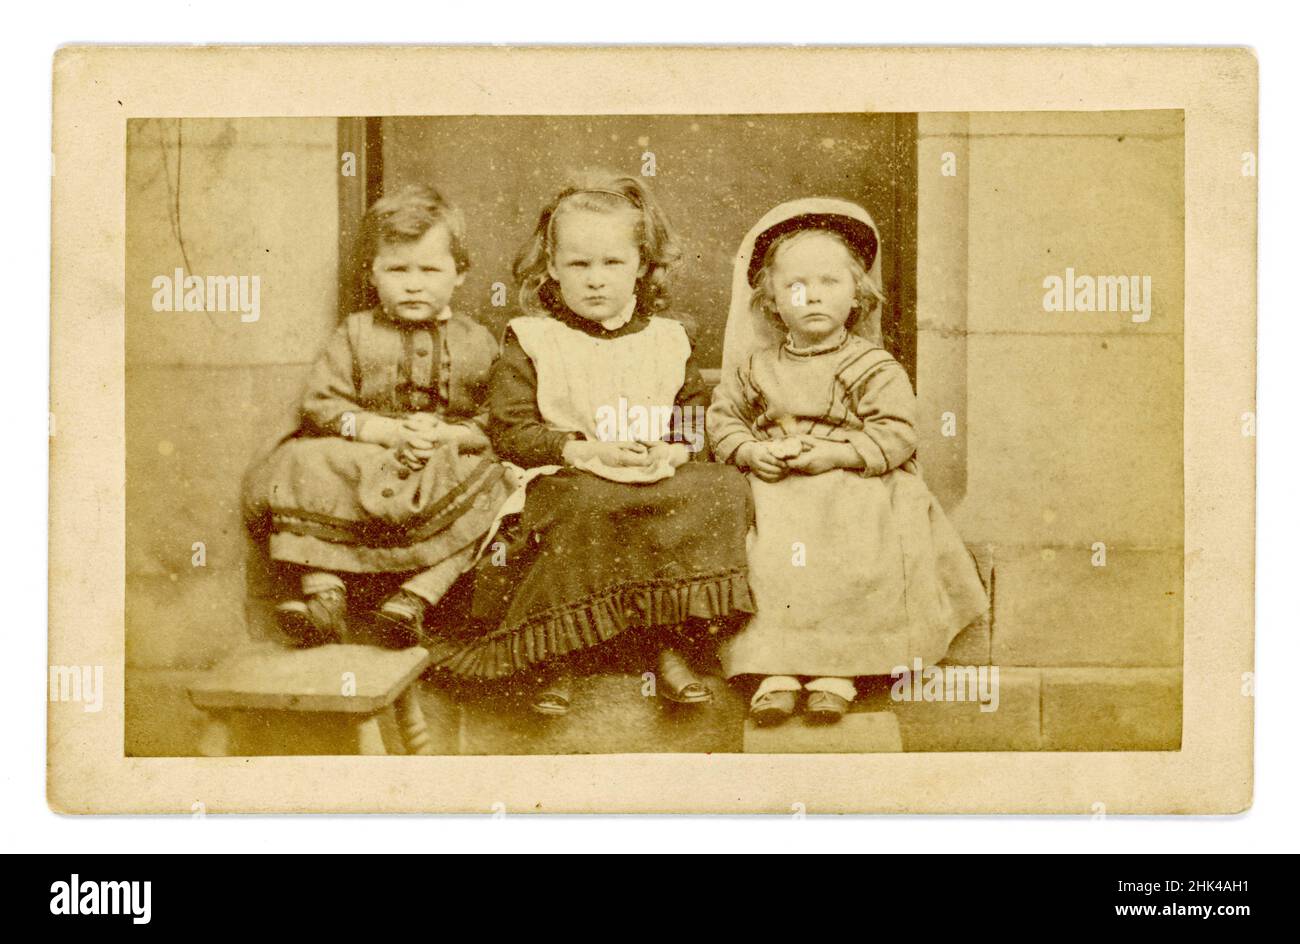 Original Victorian Carte de Visite (CDV) or visiting card, of 3 young children sitting on a step outside a large house, each holds an apple. All are wearing dresses. The child on the left appears to be a boy - it was normal to dress young boys in girls clothes in Victorian times. circa 1860's, U.K. Stock Photo